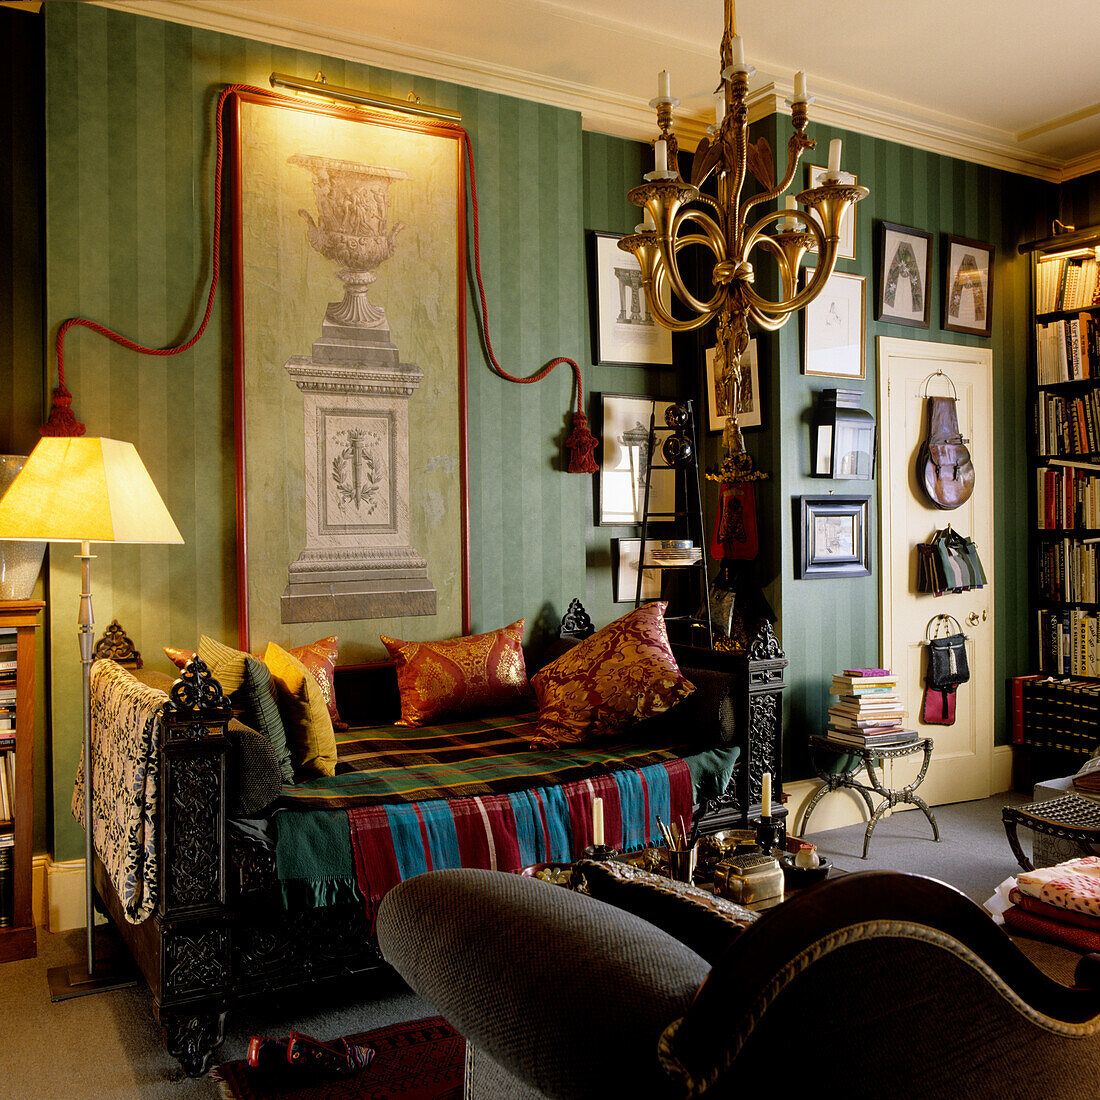 Living room with antique furniture and green wallpaper